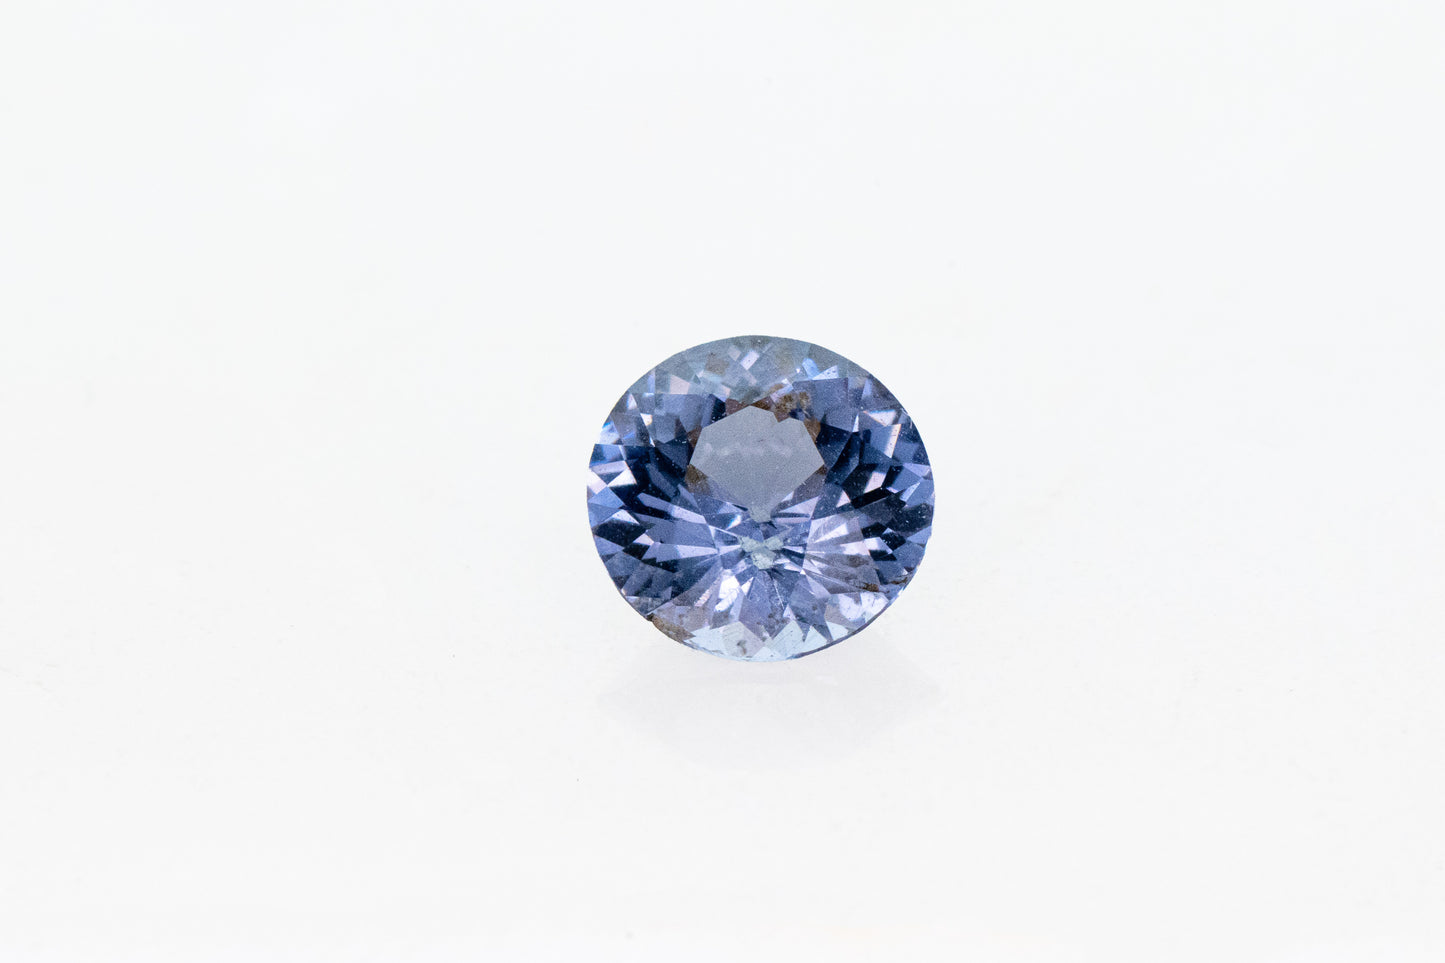 A handmade Round Blue Spinel on a white background.